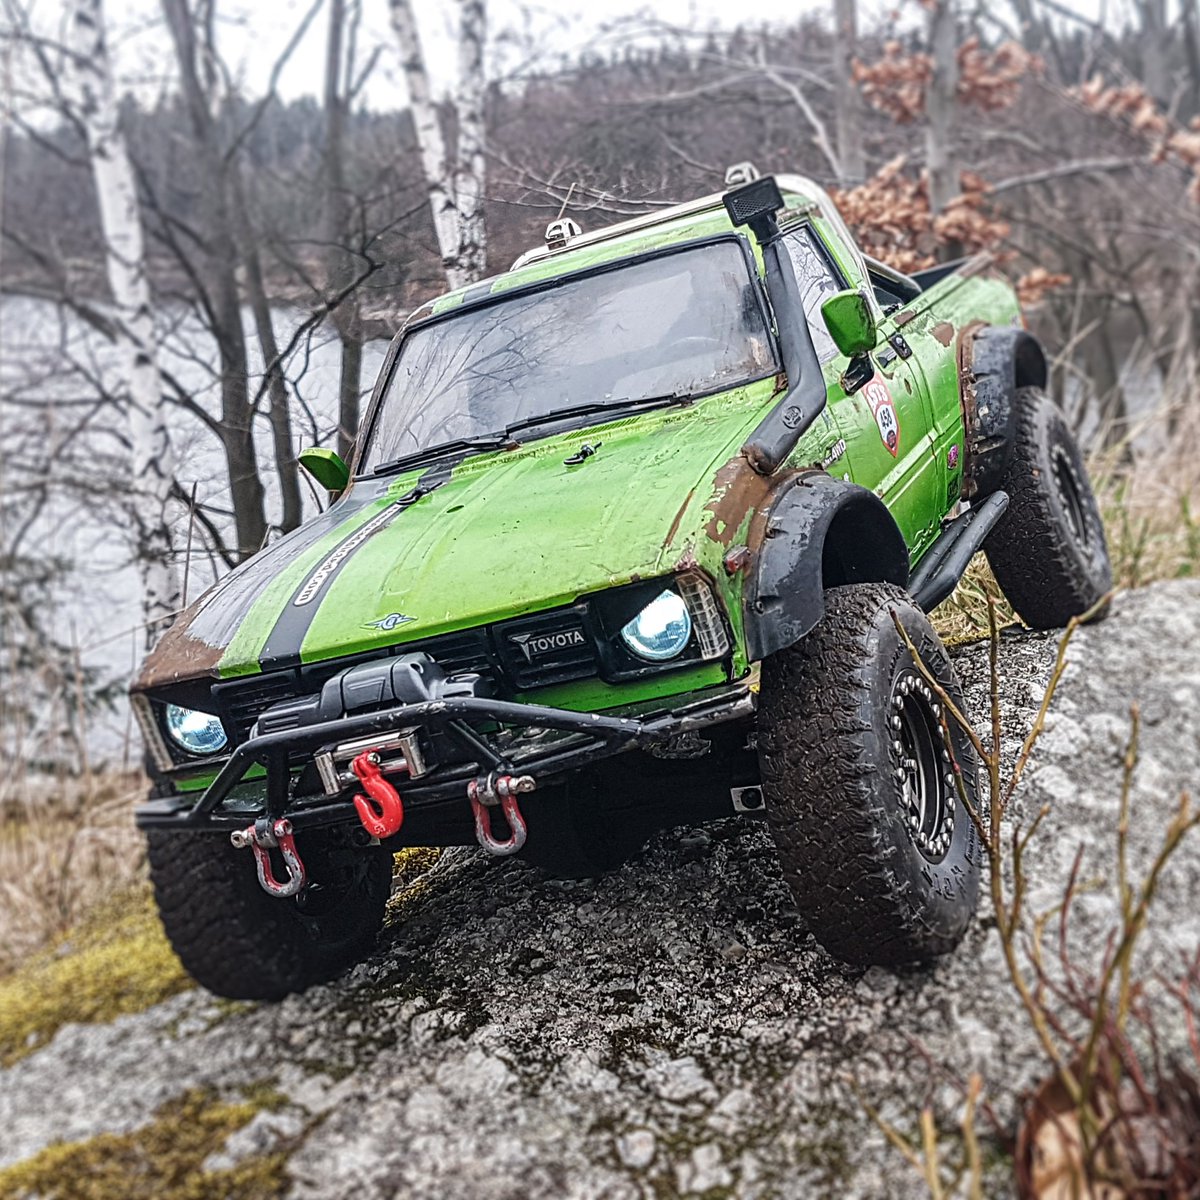 The great Toyota Hilux is sitting on the rock like a frog!

#rc #axial #axialracing #axialscx10 #toyota #toyotahilux #hilux #rctruck #rctrailtruck #rchobby #rc4wd #tamiya #pitbullrc #ssdwheels #rclove